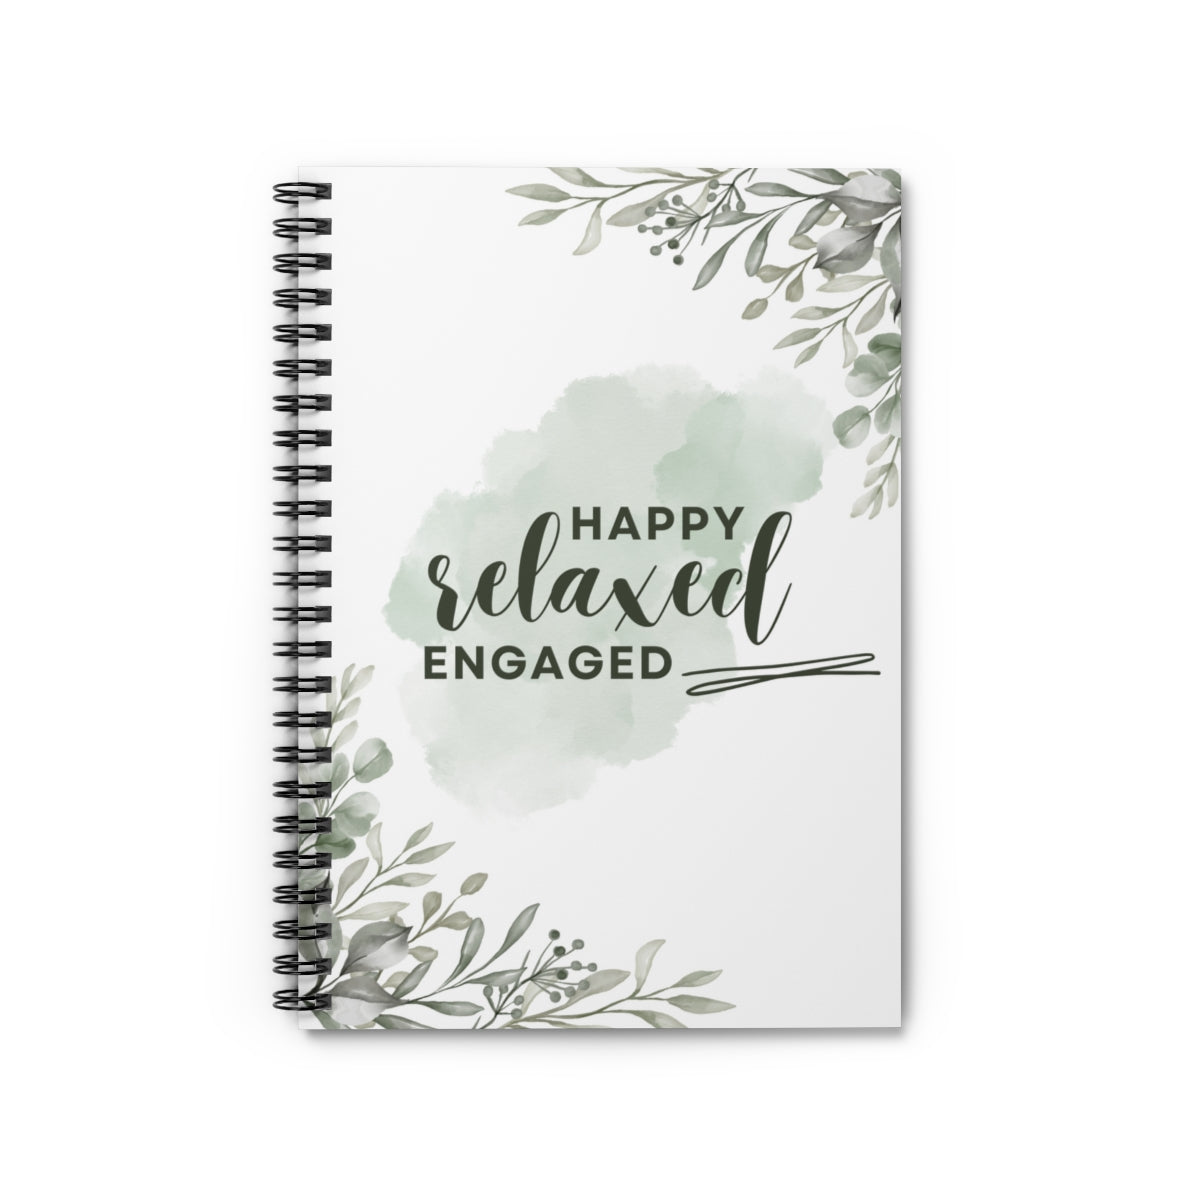 Happy Relaxed Engaged Green Notebook - Ruled Line